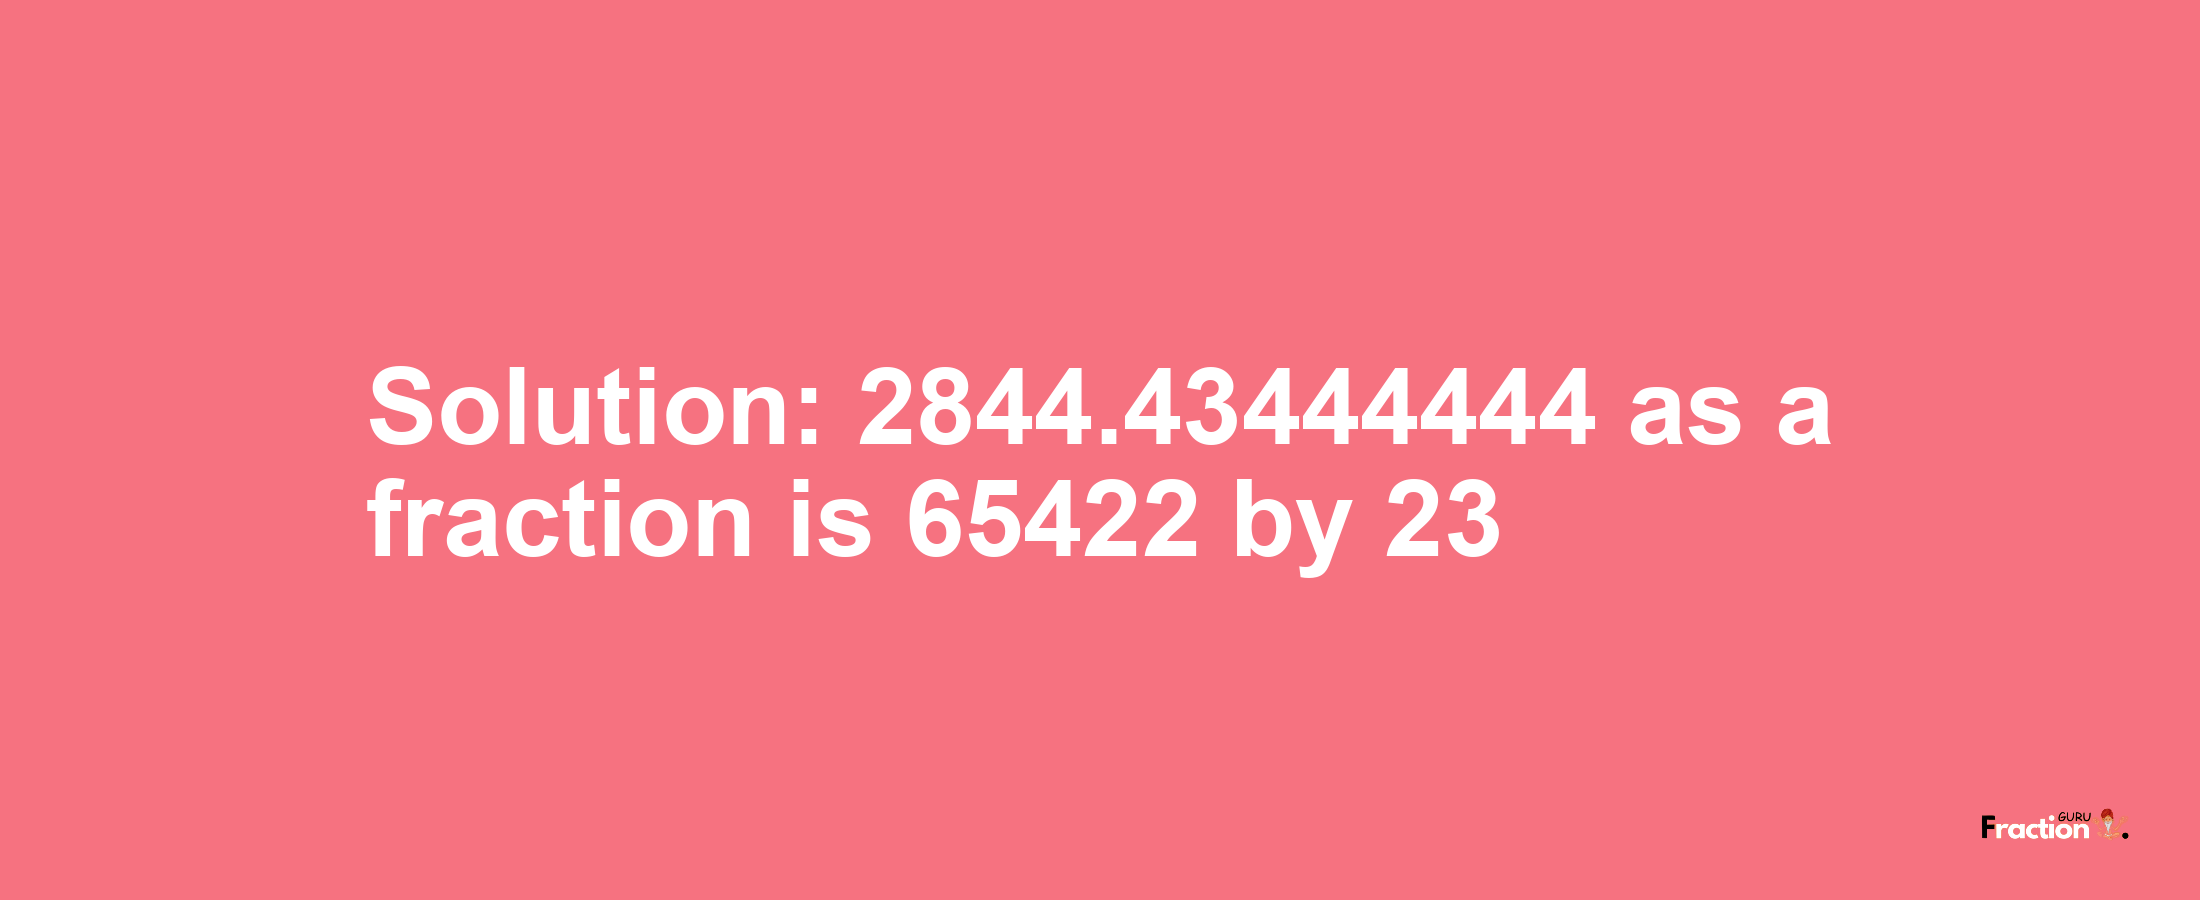 Solution:2844.43444444 as a fraction is 65422/23